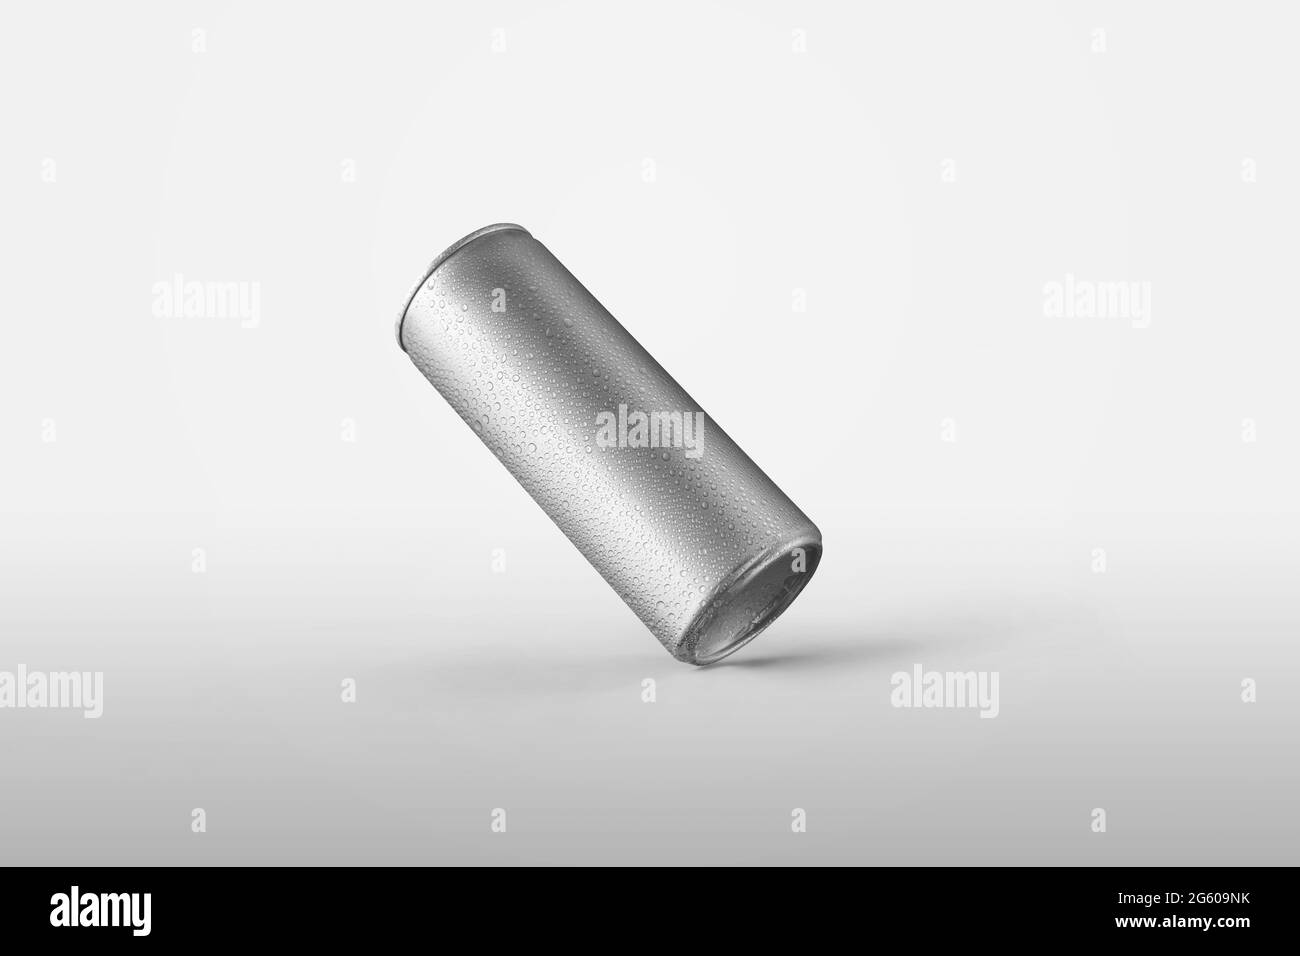 Metal can template with water drops, silver shiny packaging for presentation design and label advertising. Mockup tin bottle with condensate isolated Stock Photo